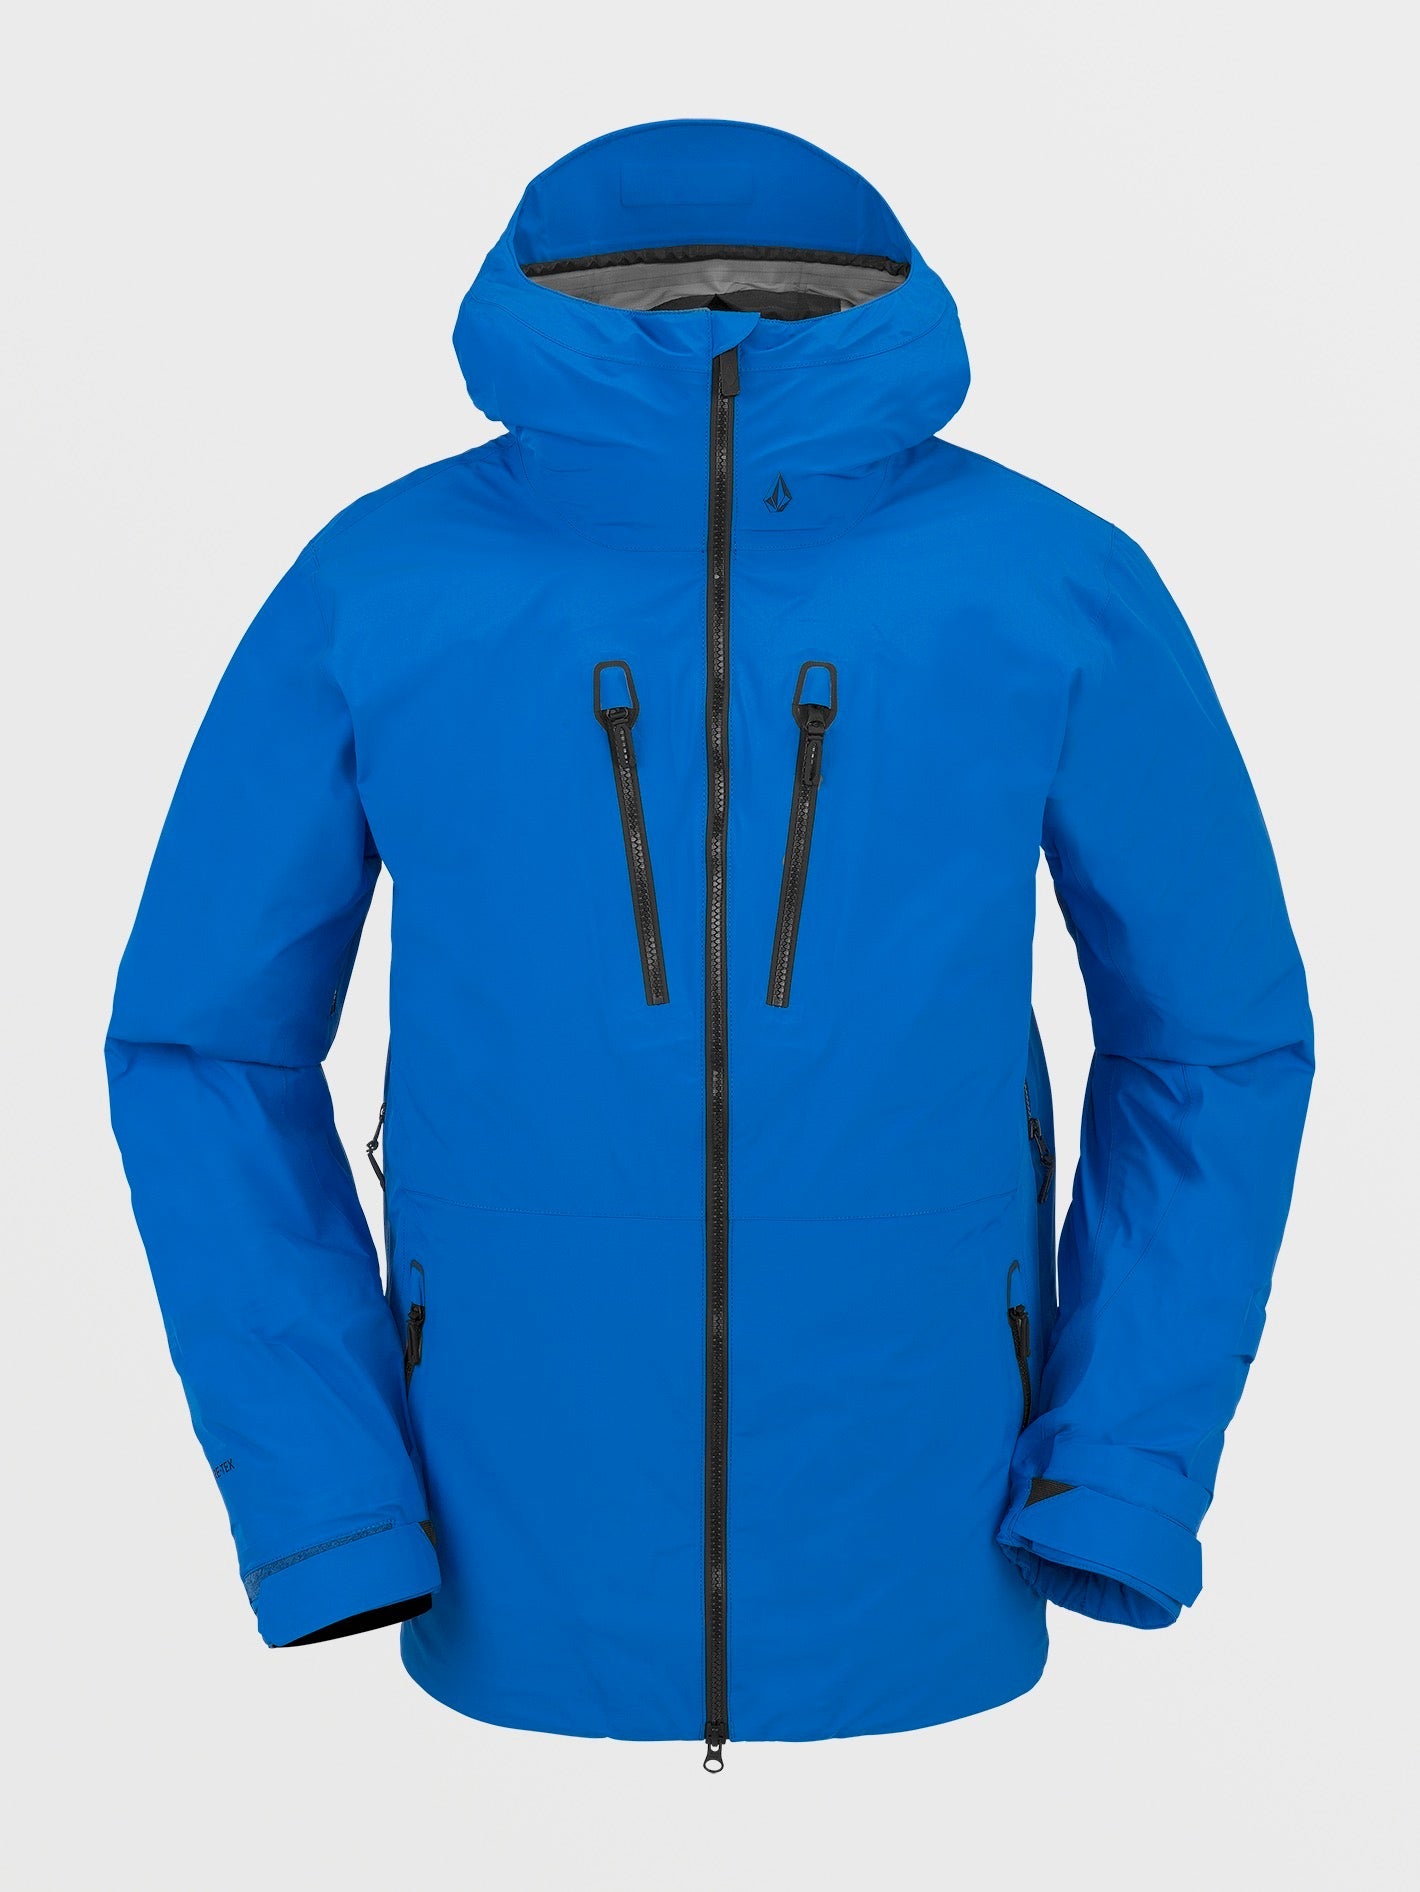 Mens Tds Infrared Gore-Tex Jacket - Electric Blue – Volcom Japan